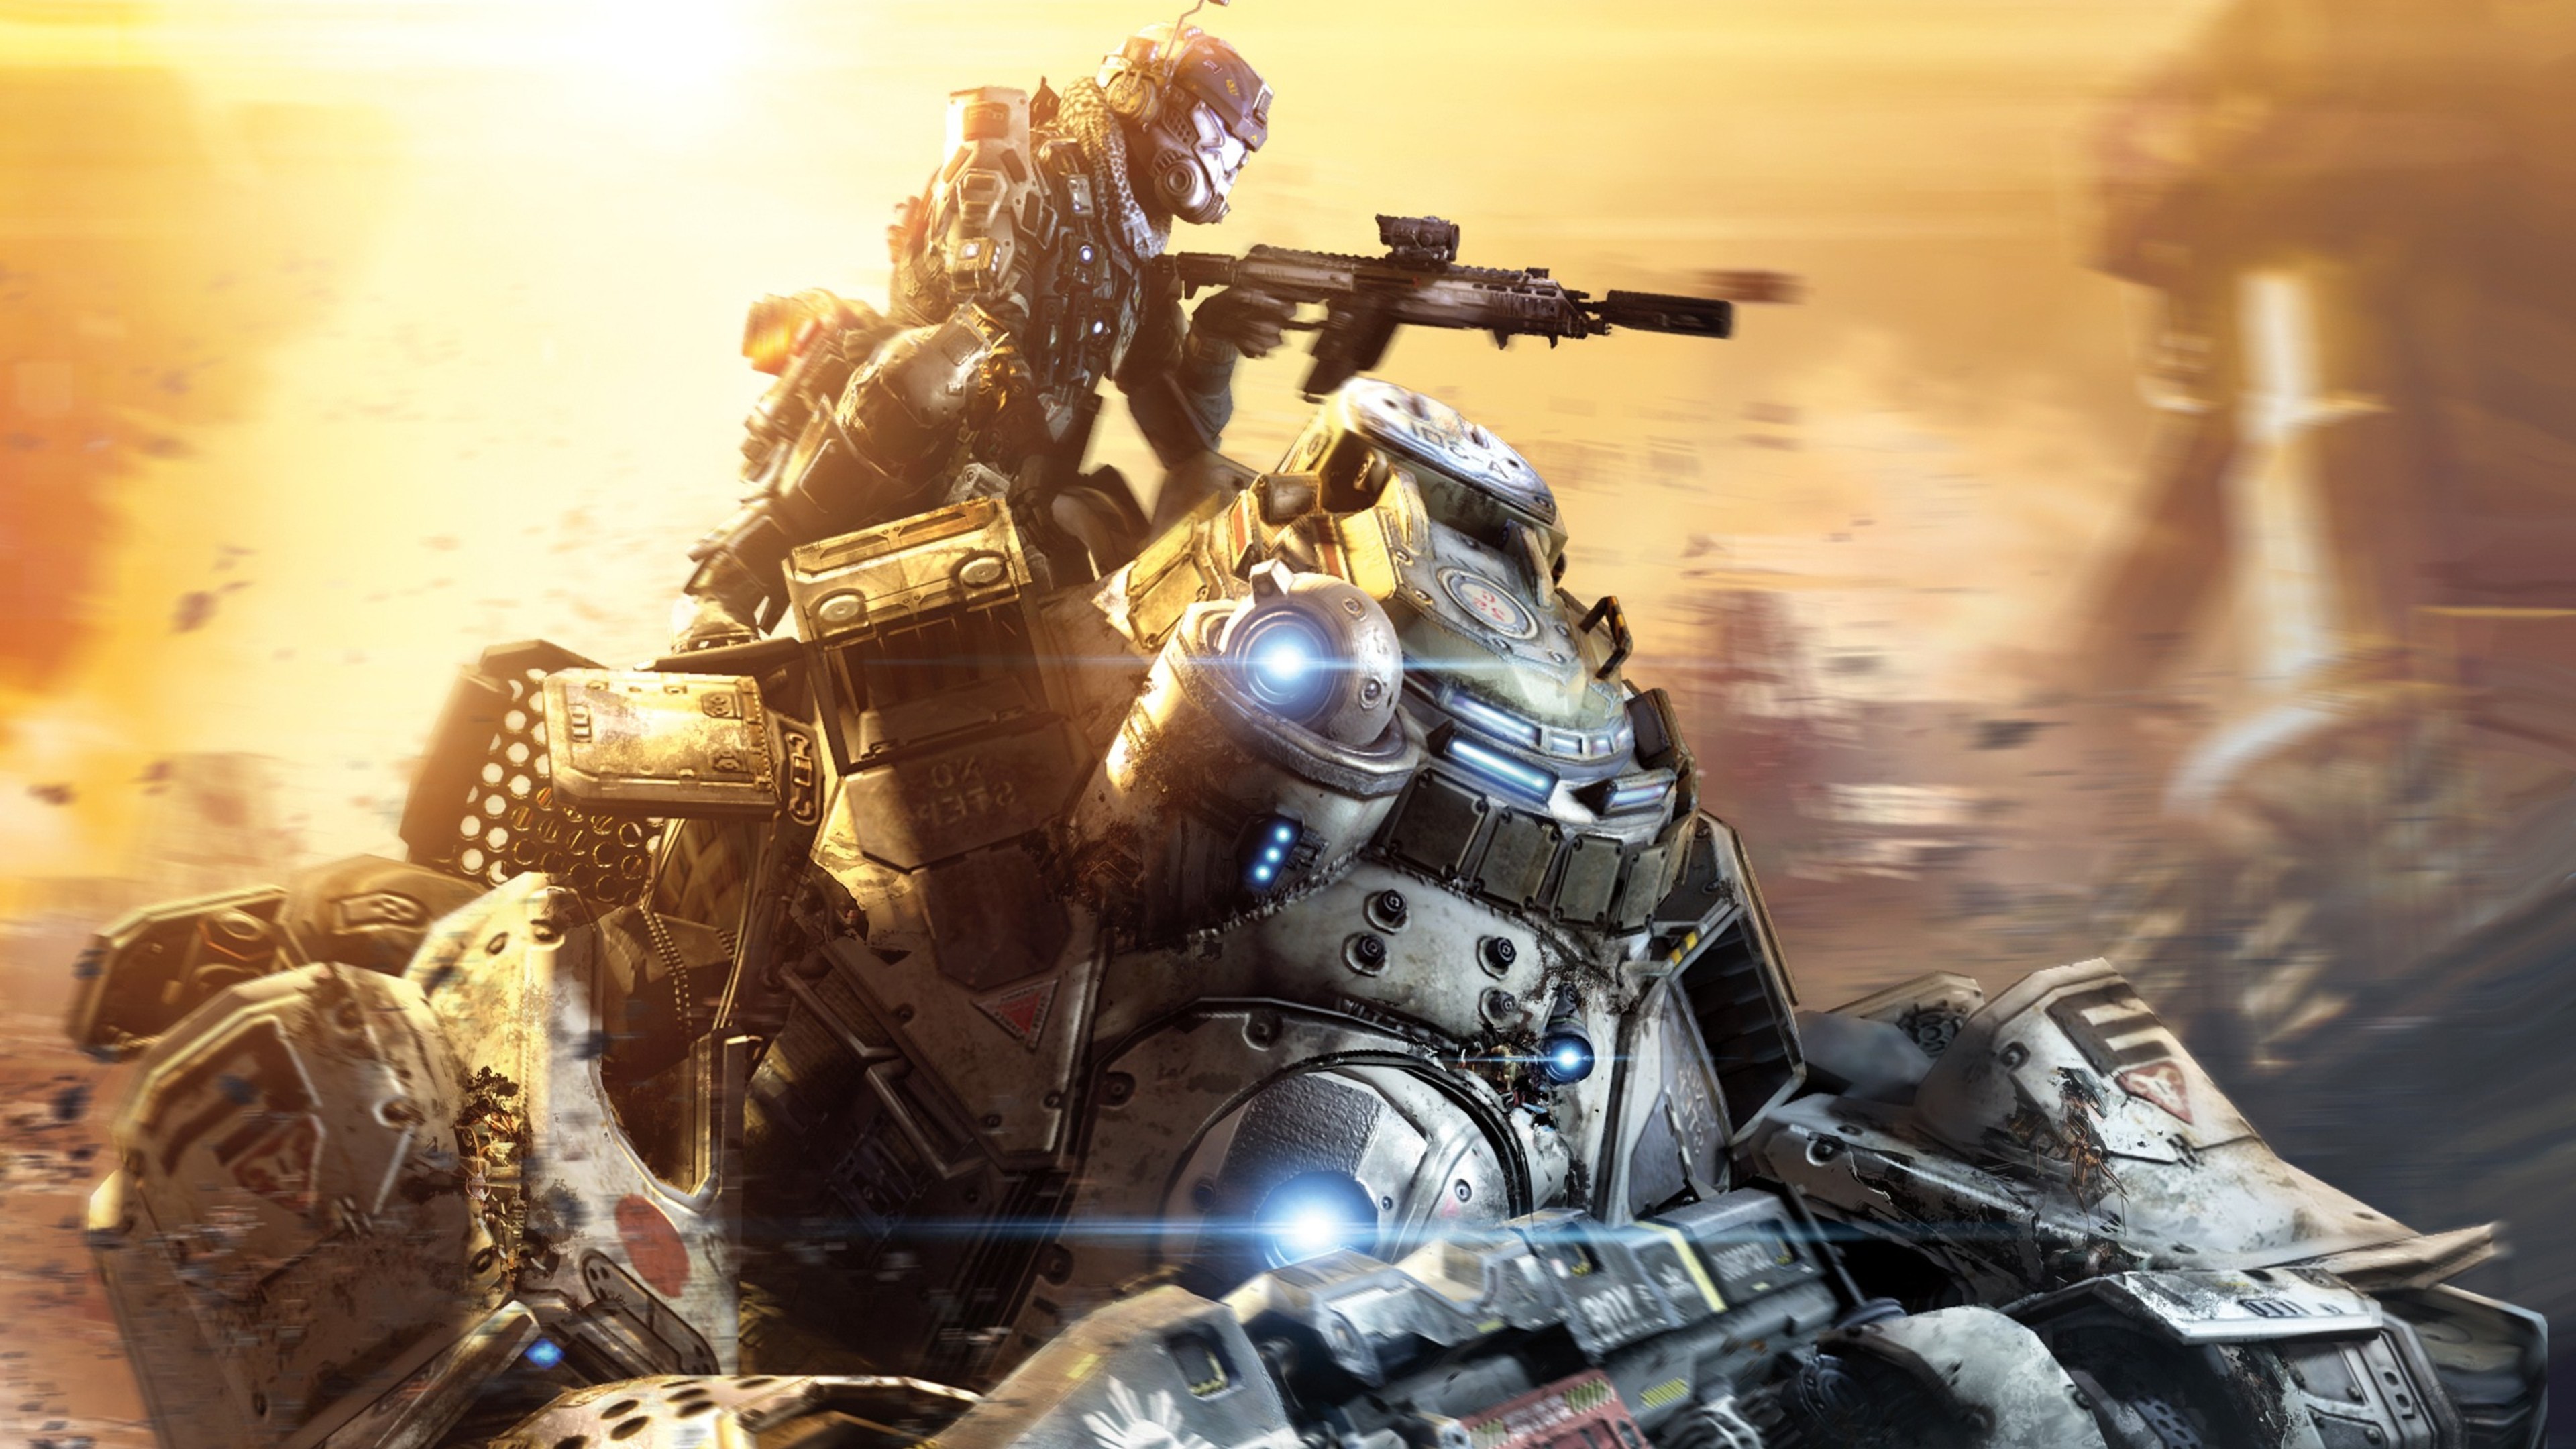 3840x2160 Titanfall Wallpaper High Definition Is Cool Wallpapers